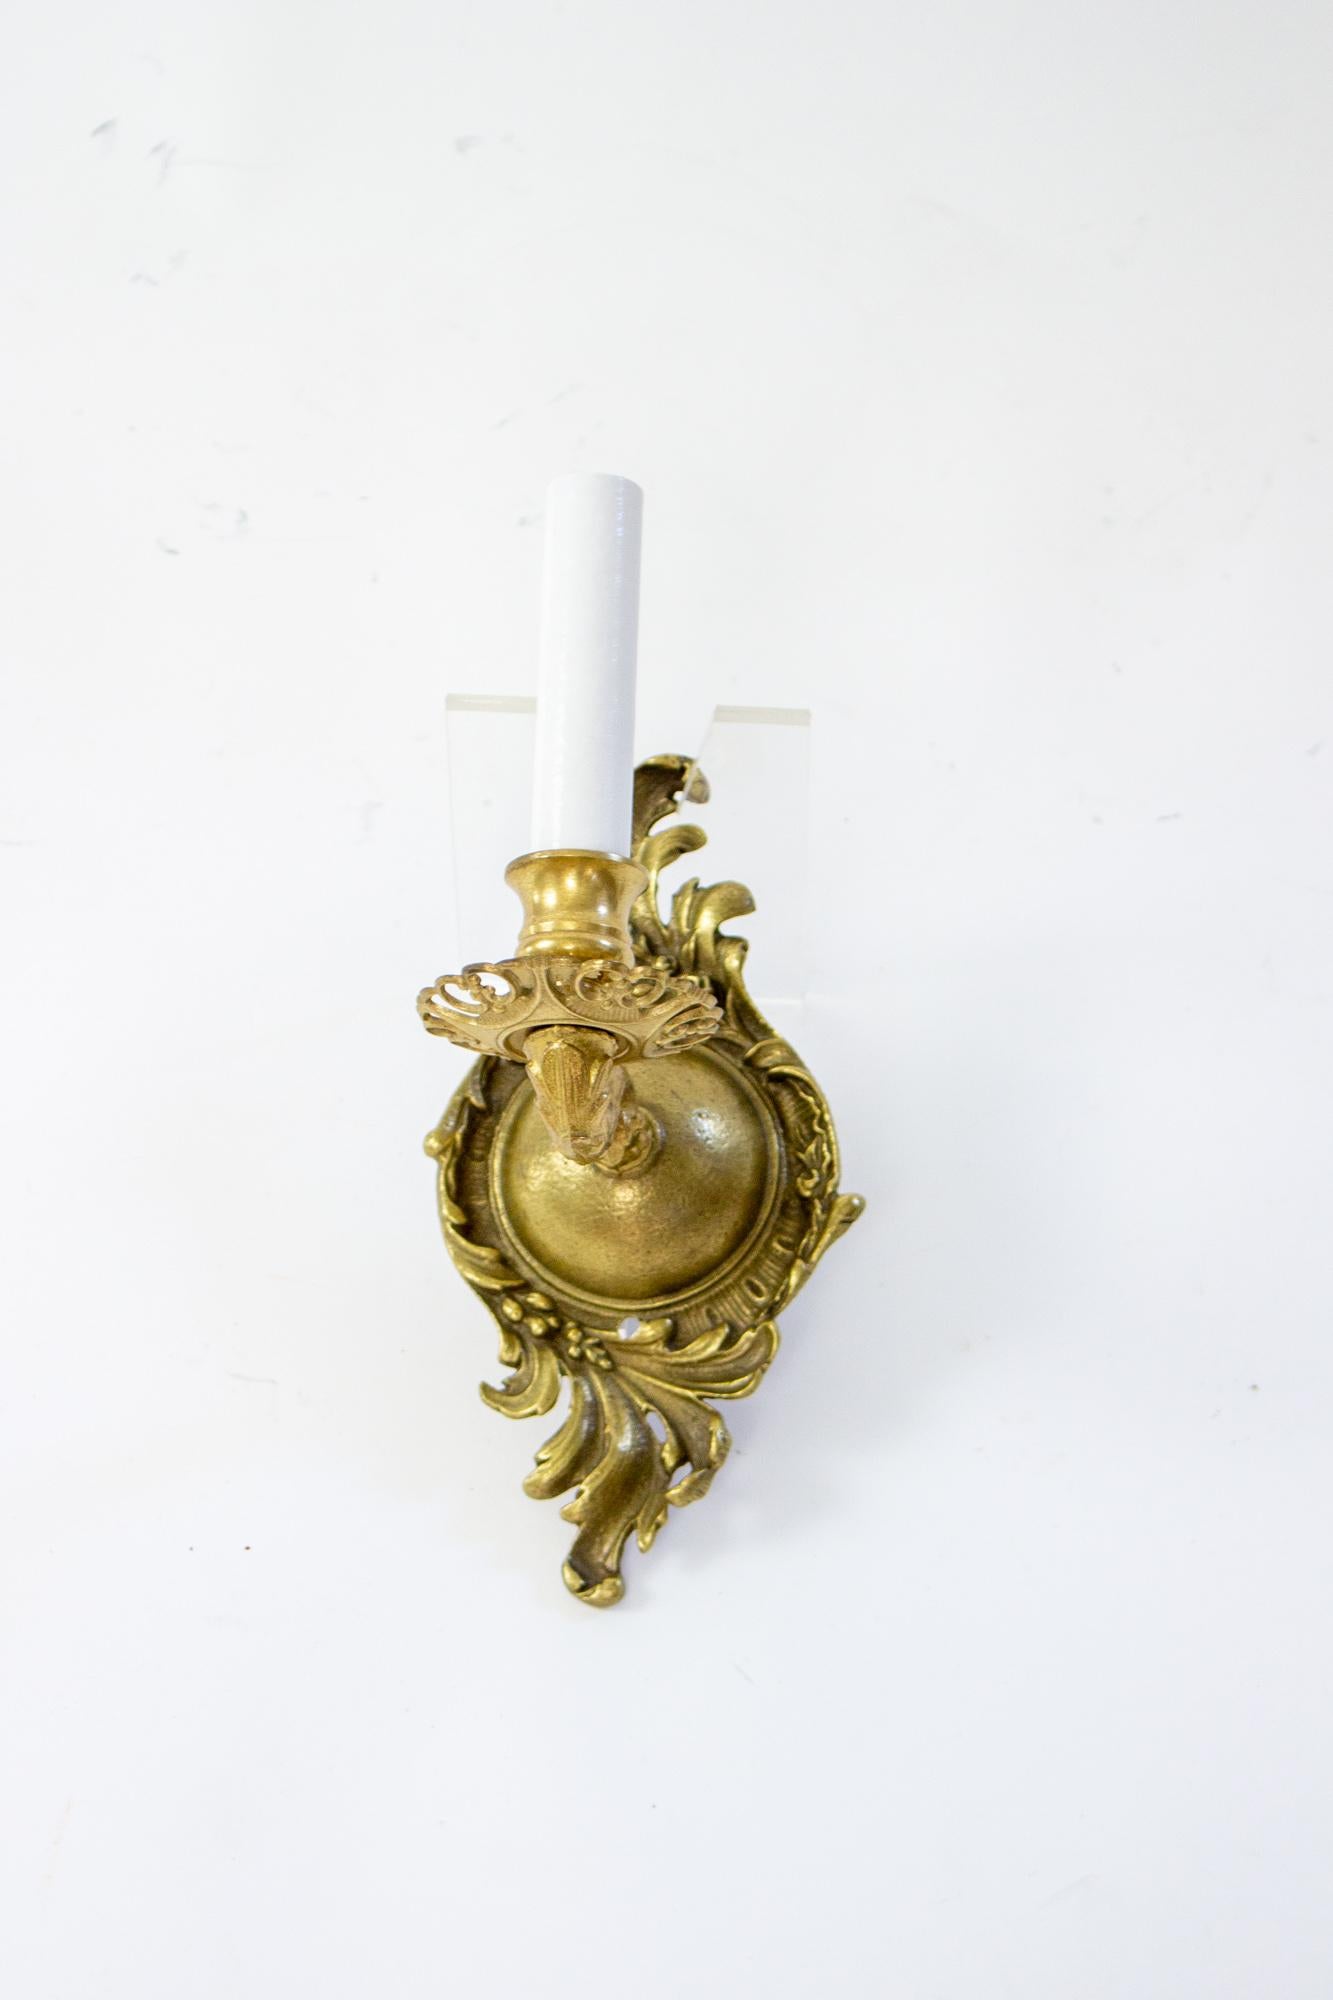 Cast brass sconces from the early 20th Century. Single arm each, with candelabra socket. Backplate is a dome surrounded by swirling leaves. Ornate cast arms, and bobeches with decorative cut outs, lightening up the sconces for a more delicate look.